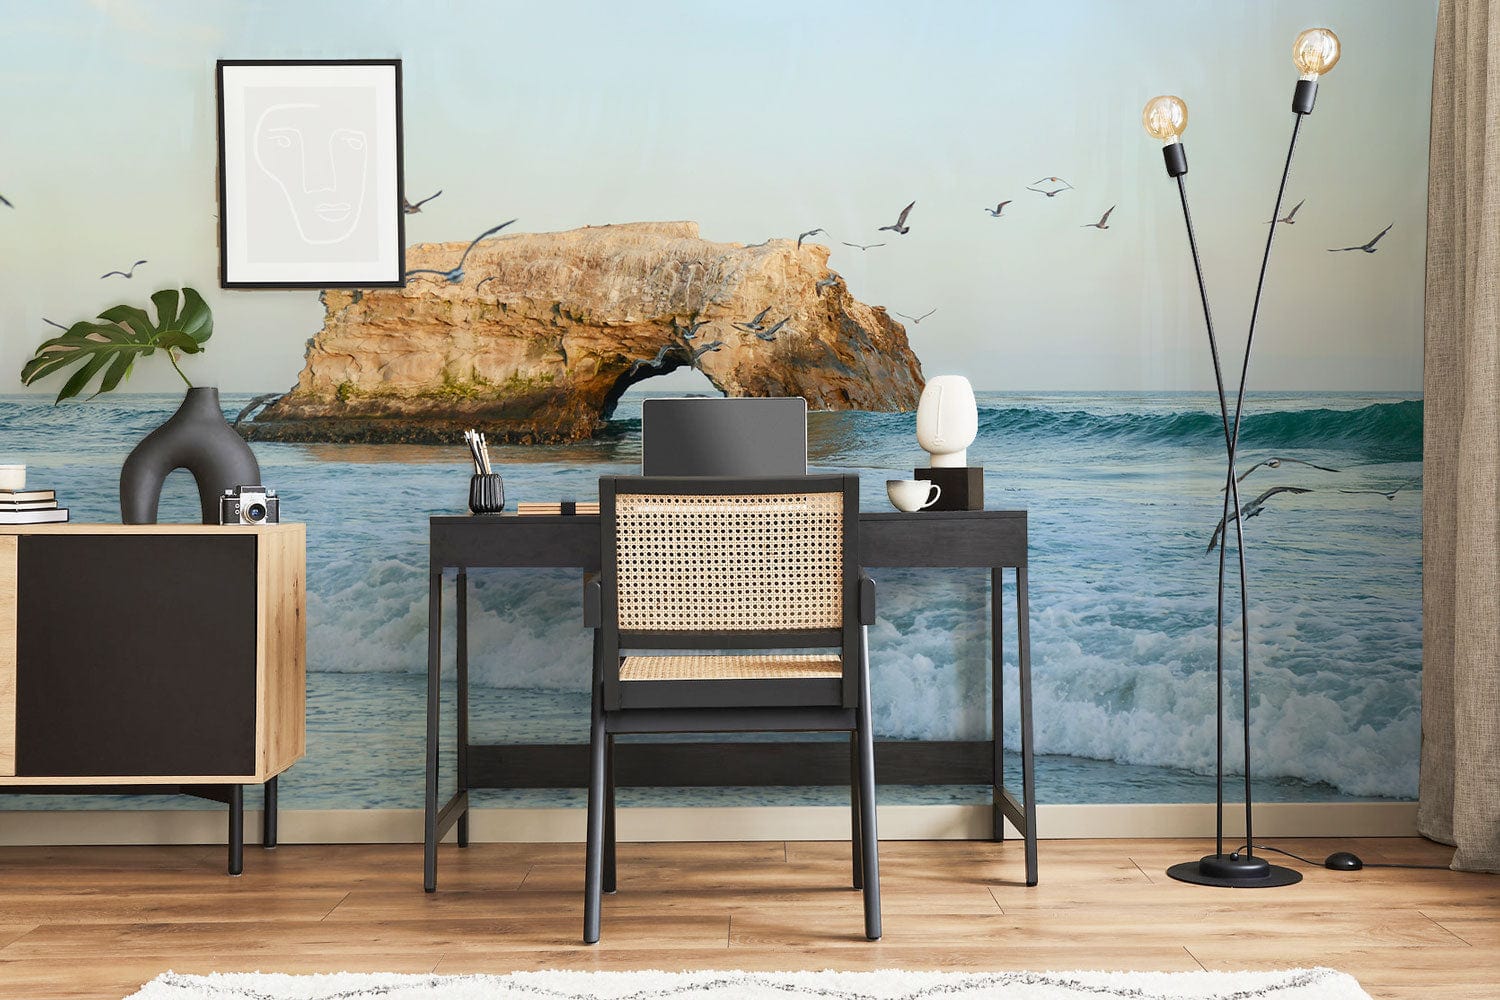 seagull and rock wallpaper mural office aesthetic design